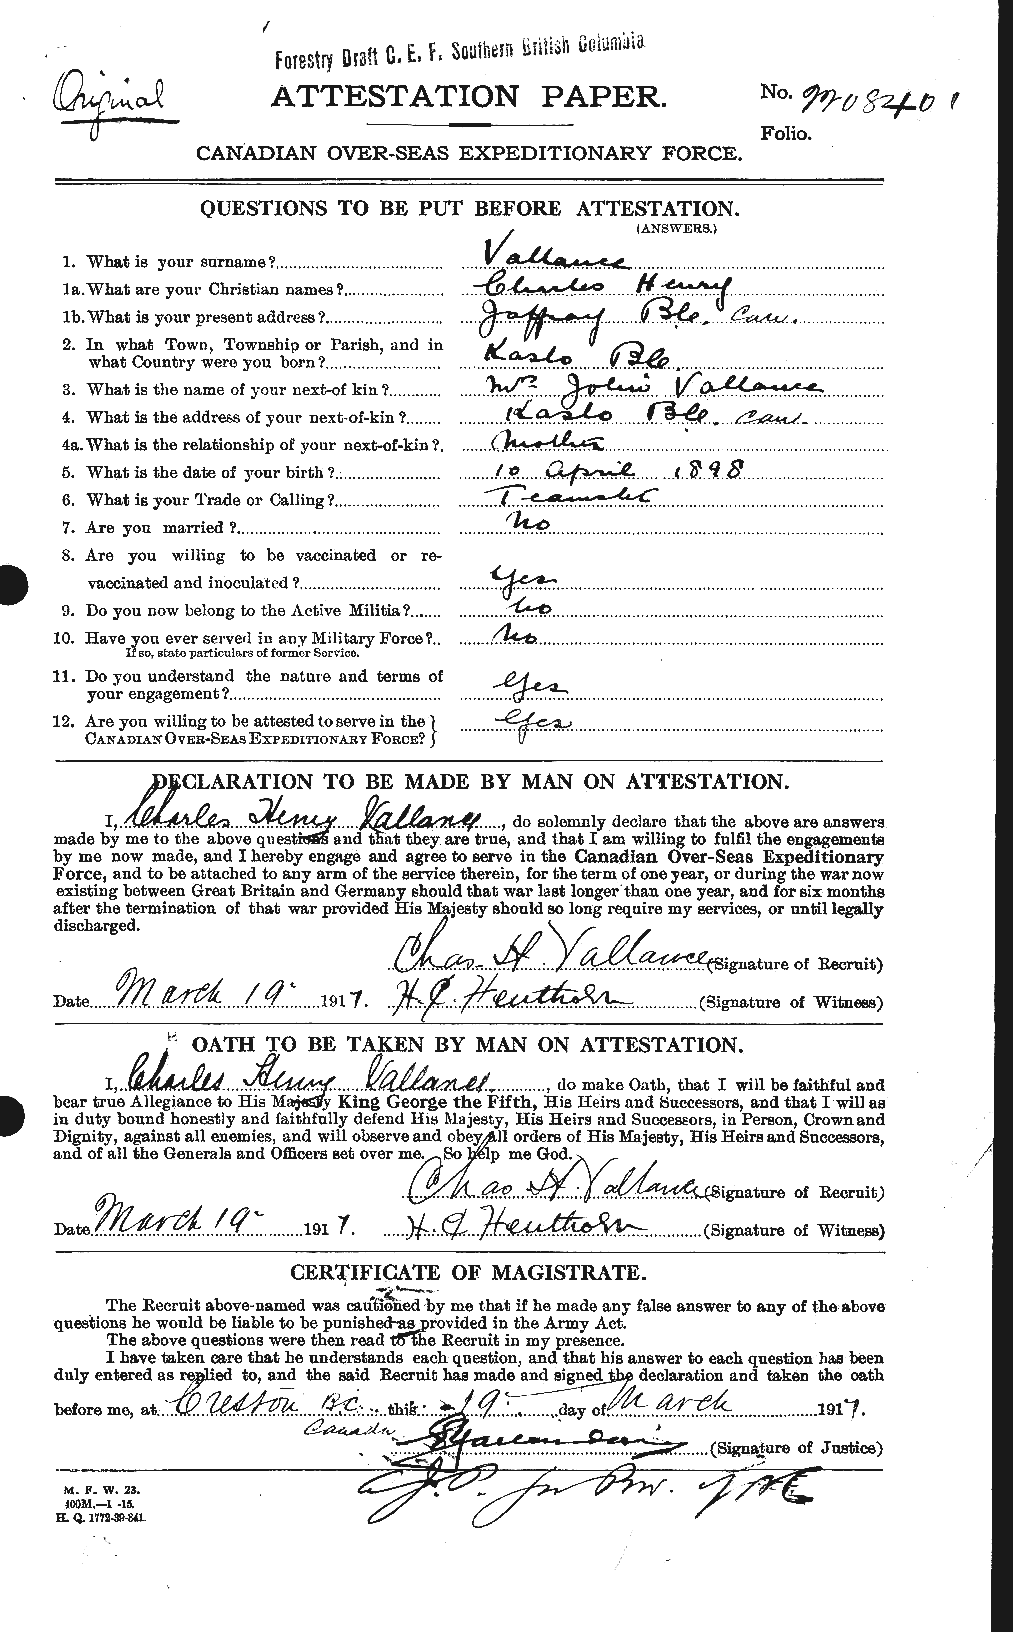 Personnel Records of the First World War - CEF 645112a